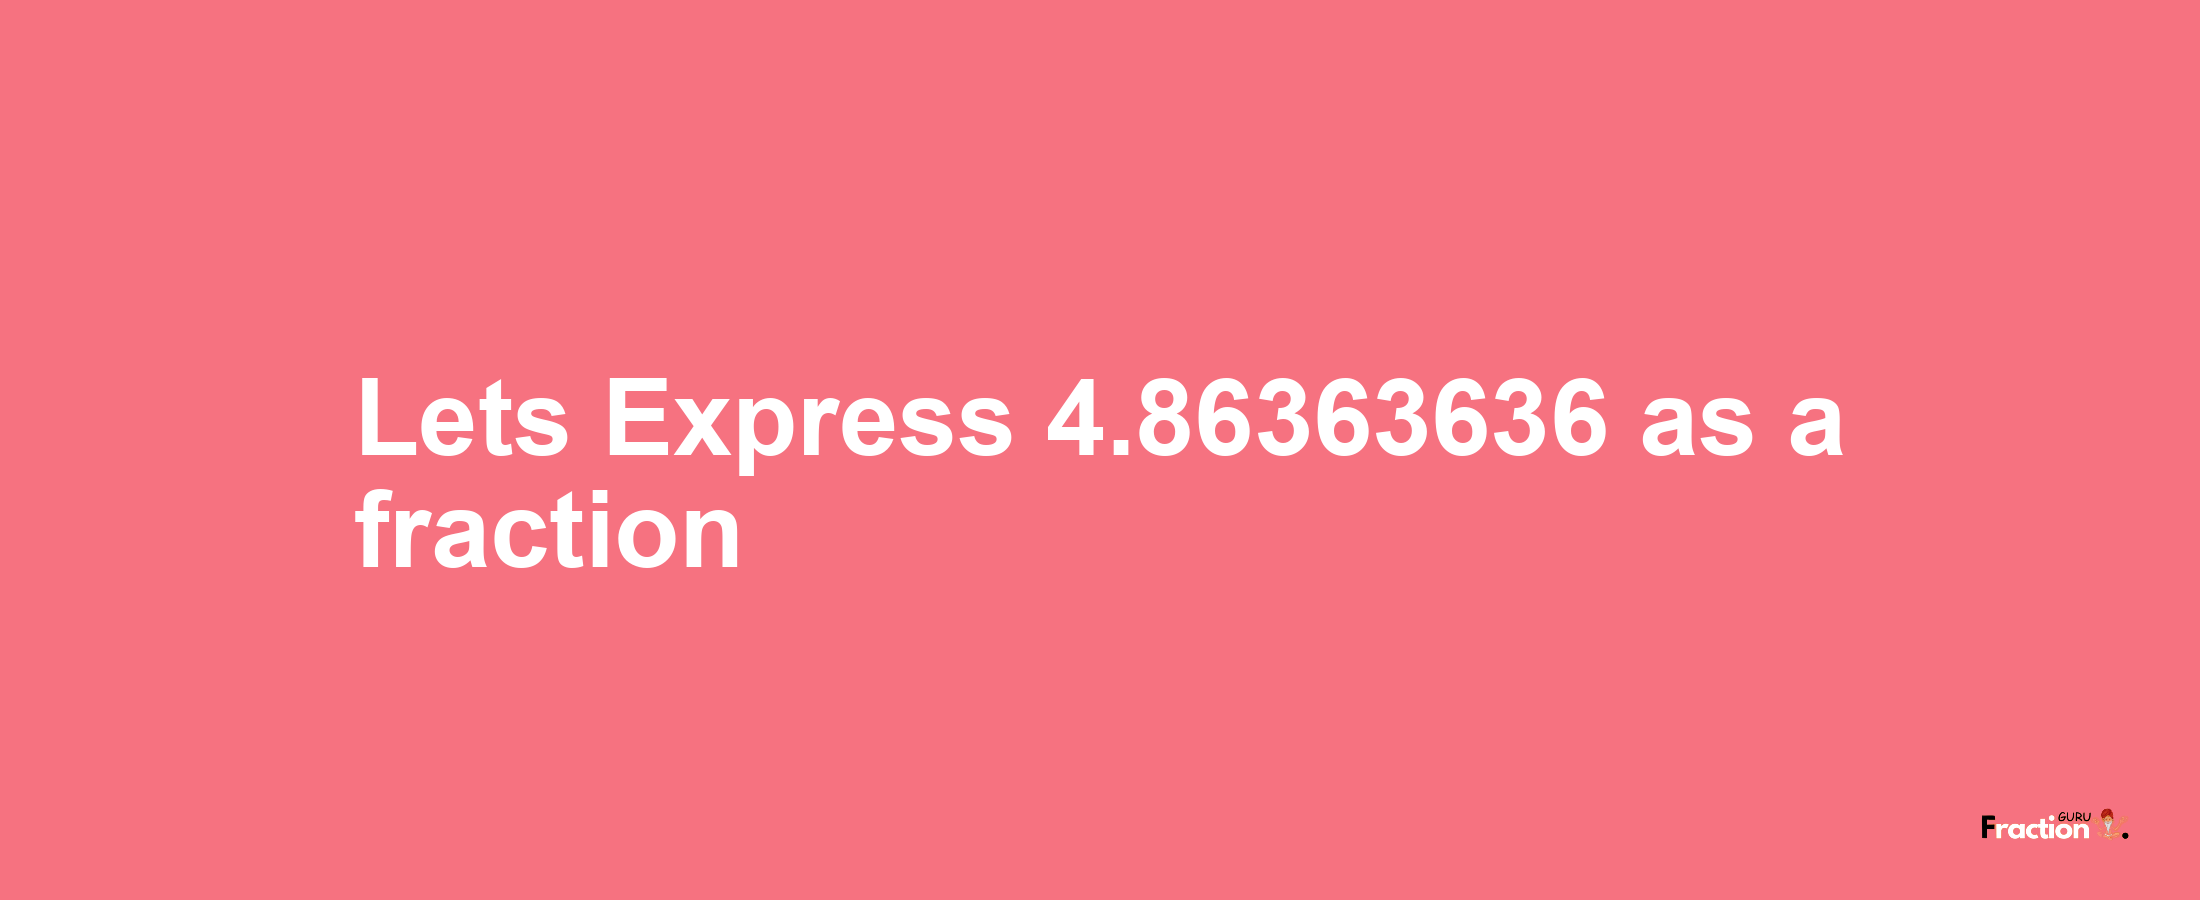 Lets Express 4.86363636 as afraction